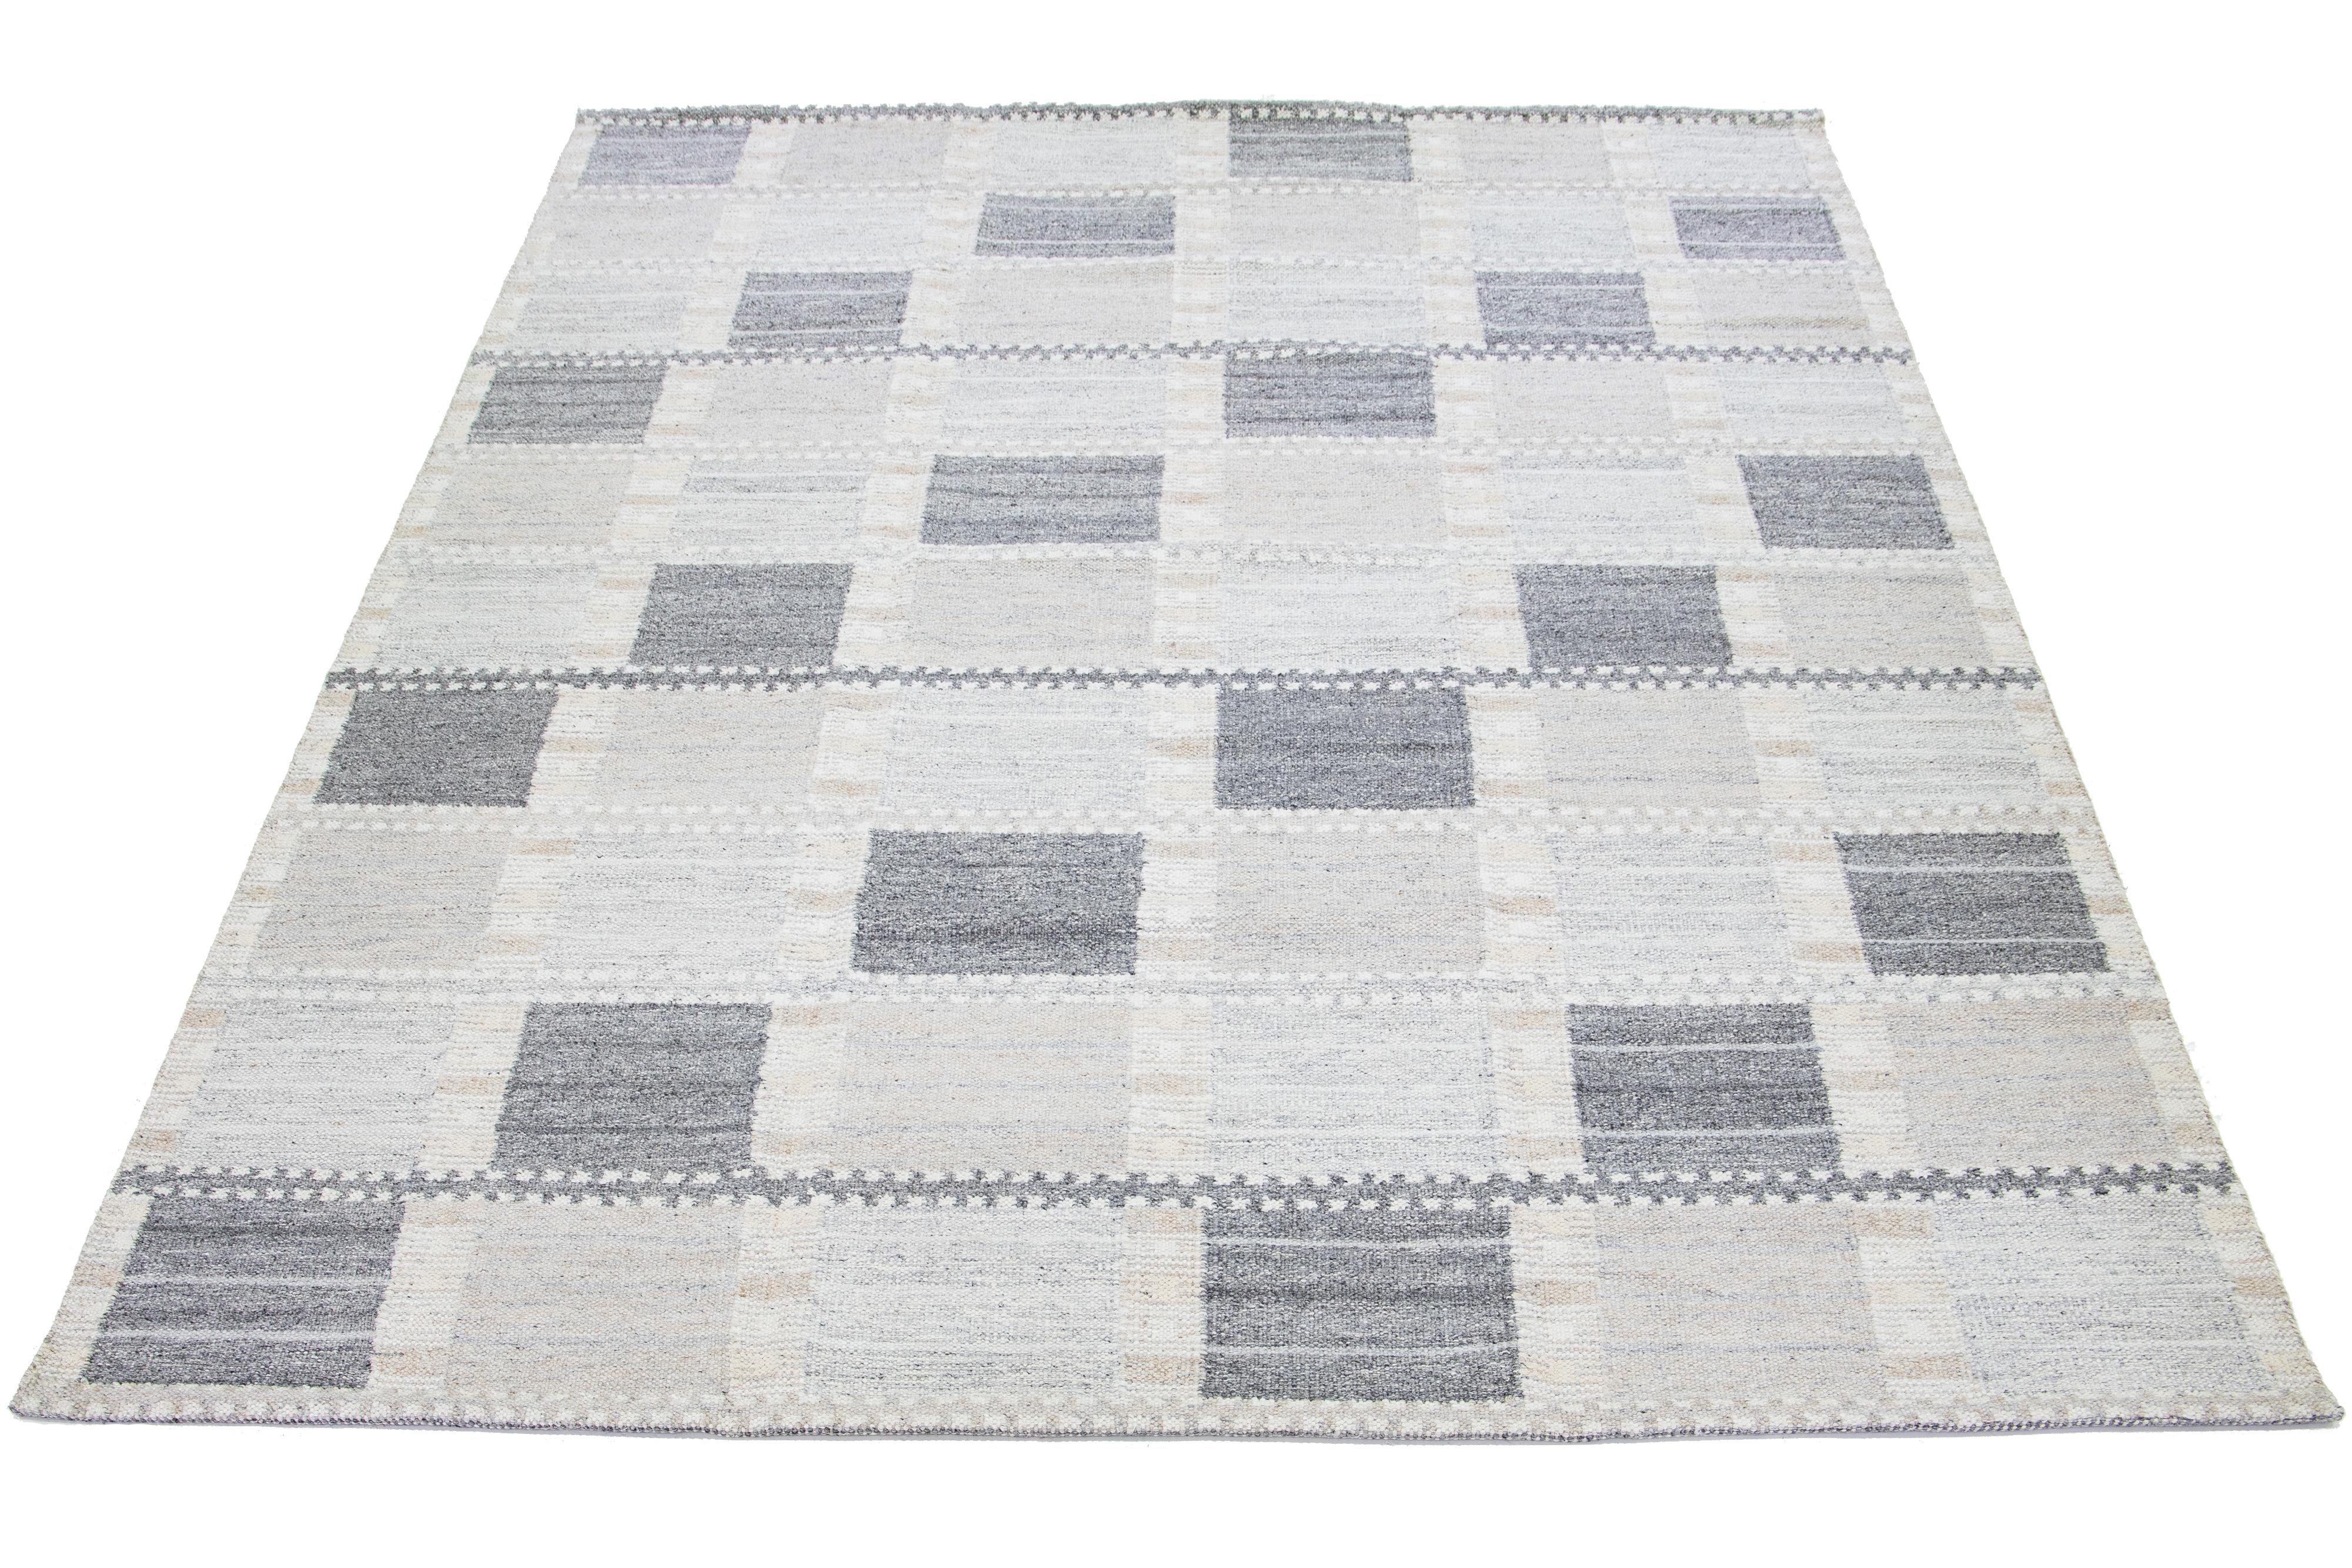 Inspired by Swedish design, this modern woolen rug features a subtle light gray backdrop. This exquisite flatweave rug is beautifully embellished with a striking geometric pattern in dark gray and beige tones.

 This rug measures 9'10